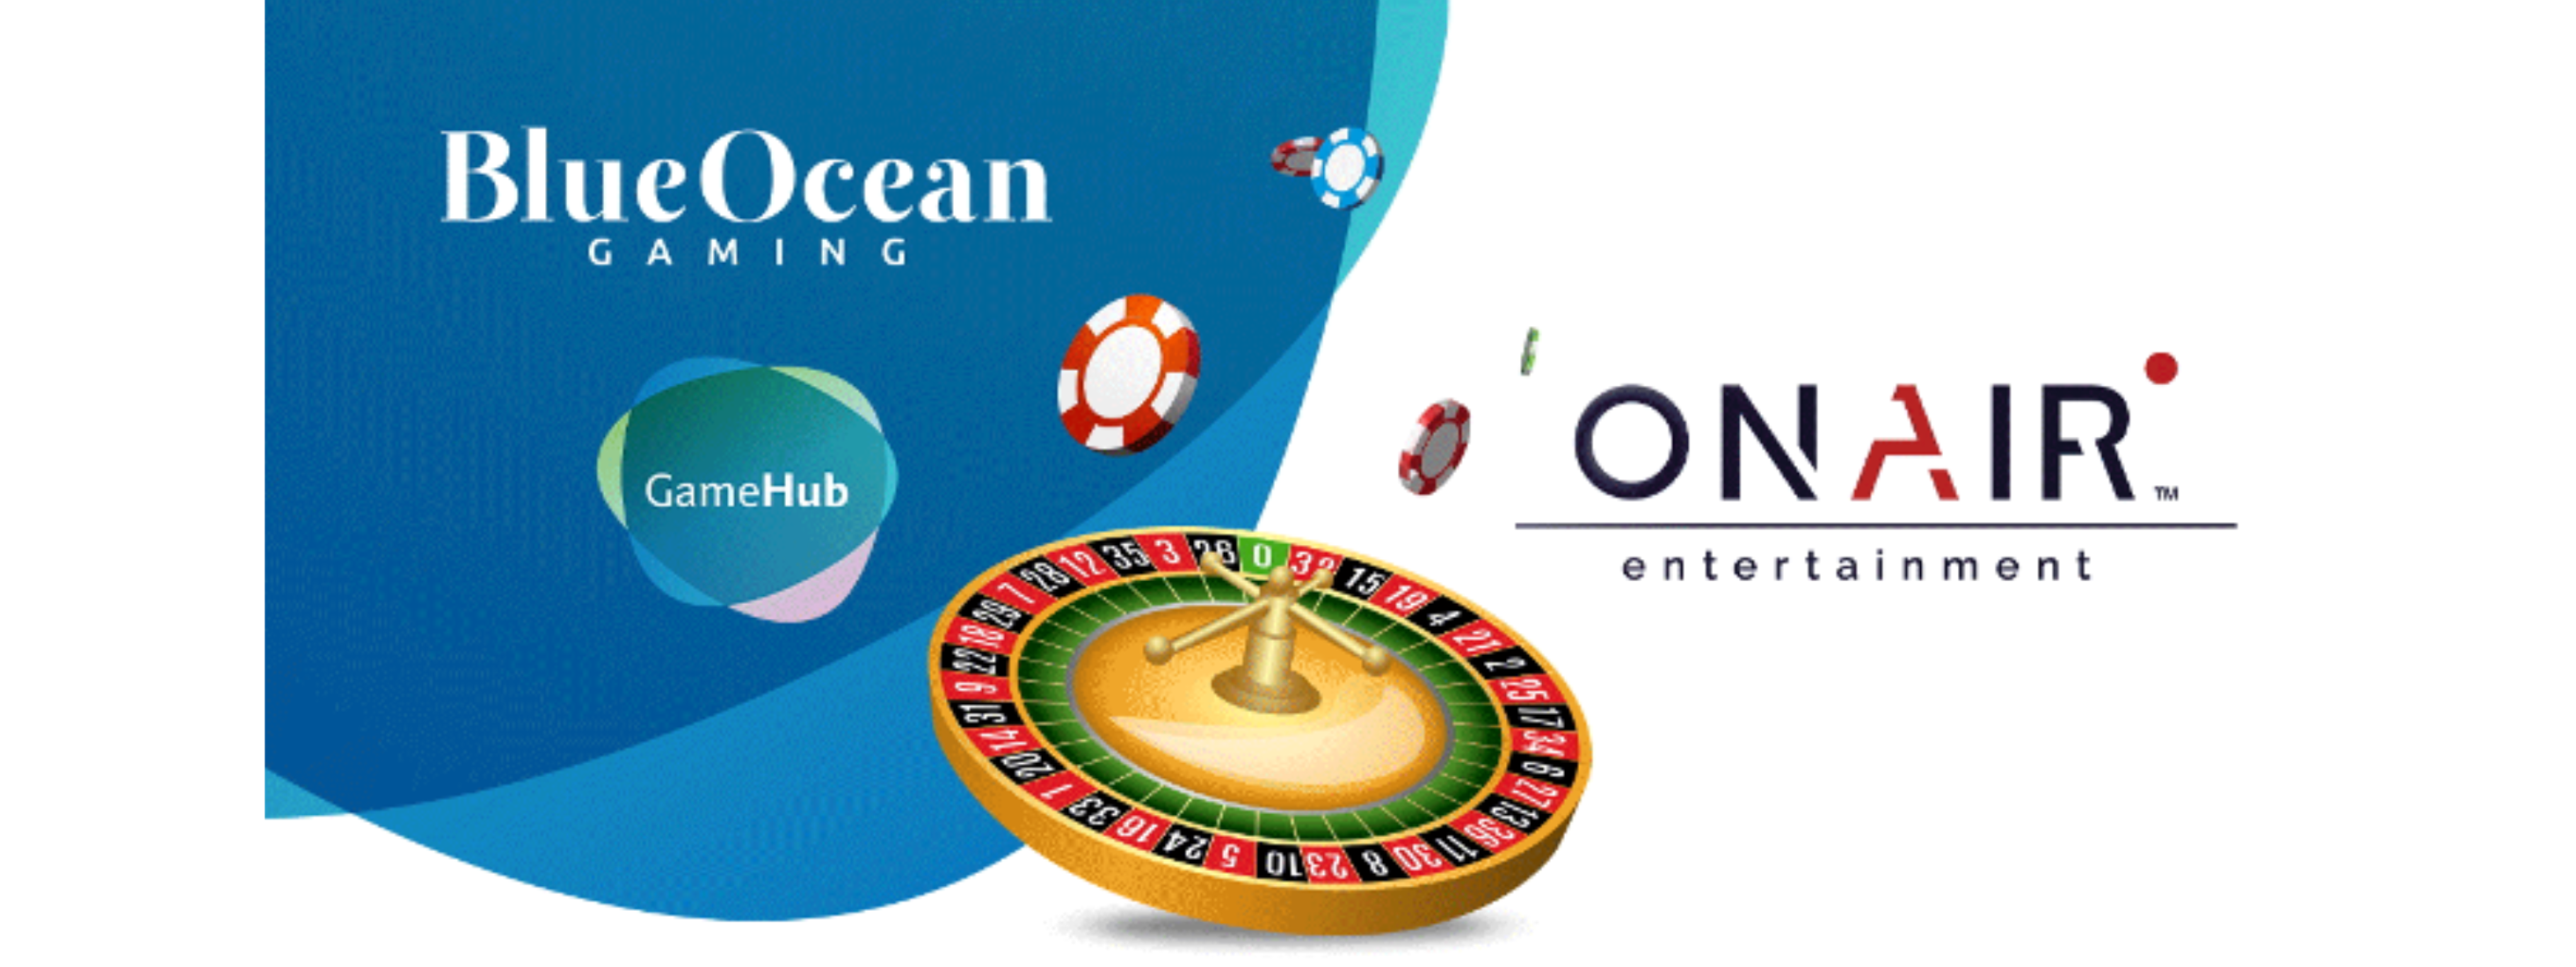 BlueOcean and OnAir Entertainment's logo displayed near each other, with a Roulette wheel and casino chips in between them to represent their partnership agreement.